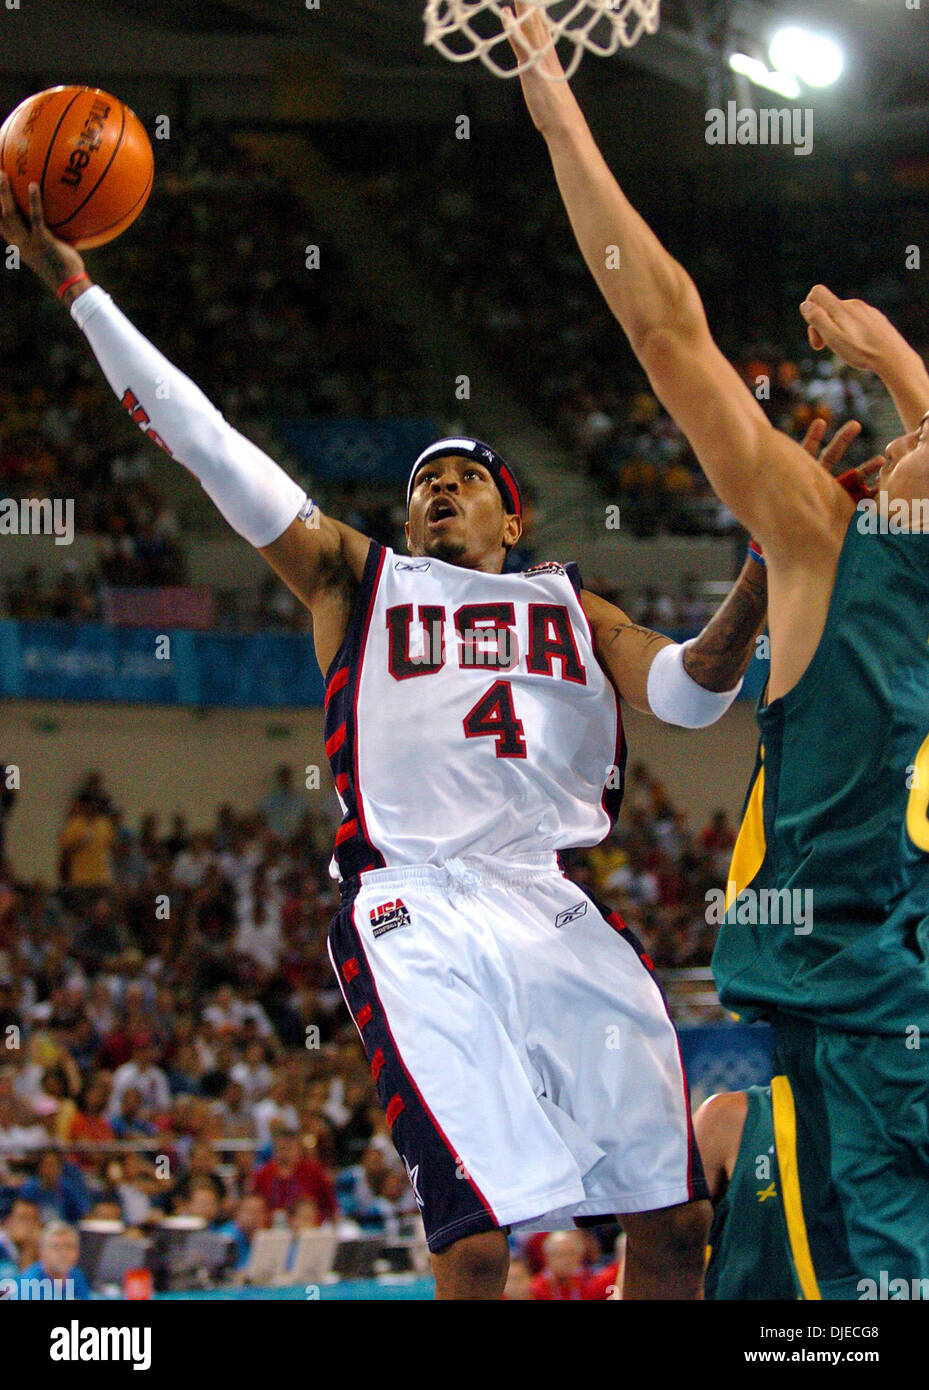 Aug 19, 2004; Athens, GREECE; U.S. Olympic basketball team member ALLEN IVERSON shoots Thursday Aug. 19, 2004 in Athens, Greece during the U.S.'s 89-79 winn over Australia. Stock Photo